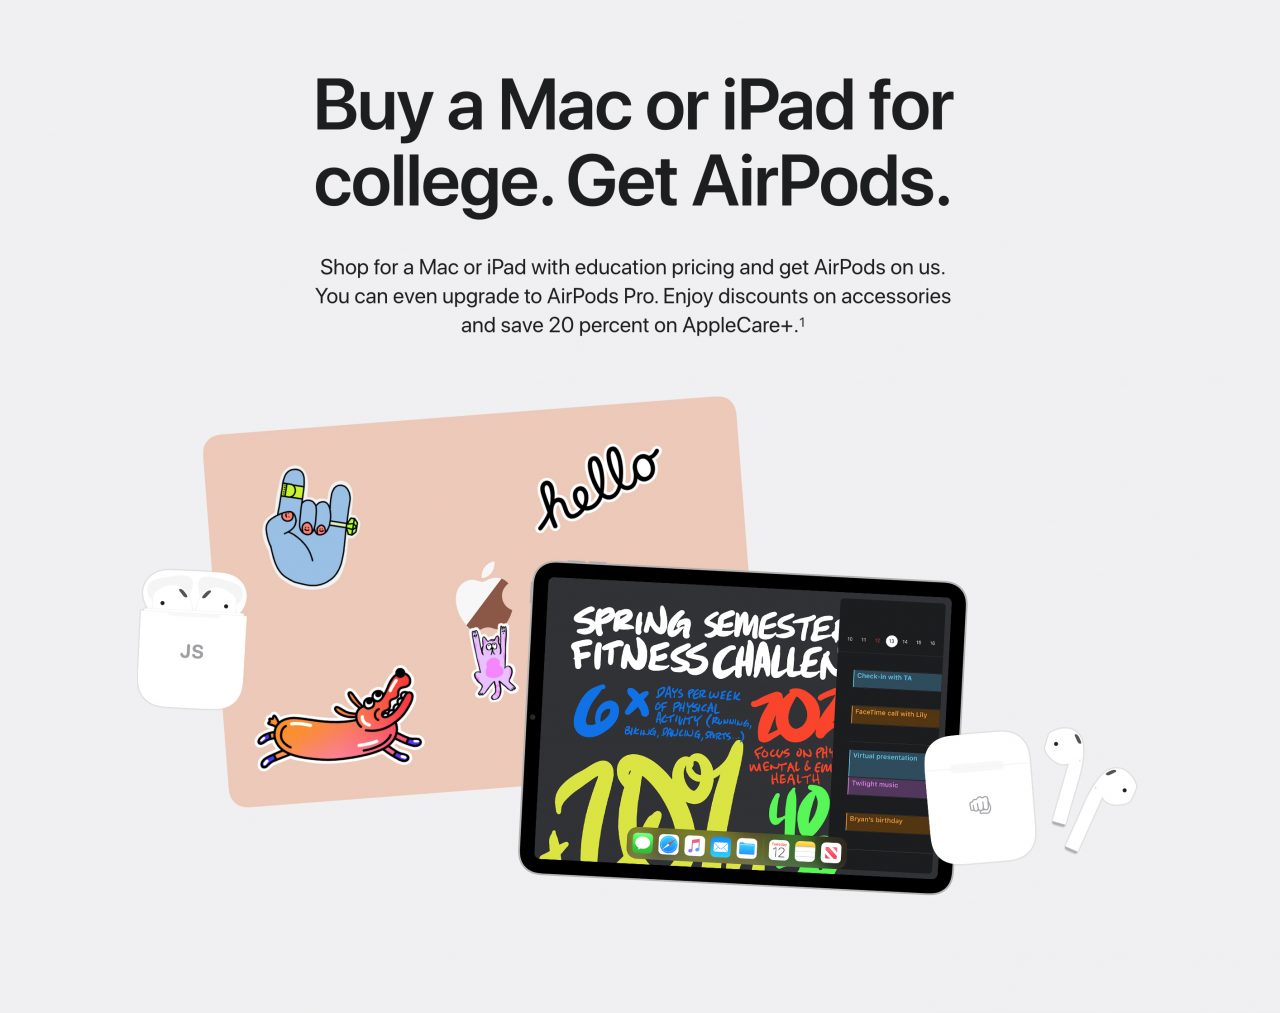 Free AirPods with new Macs and iPads for students RouteNote Blog